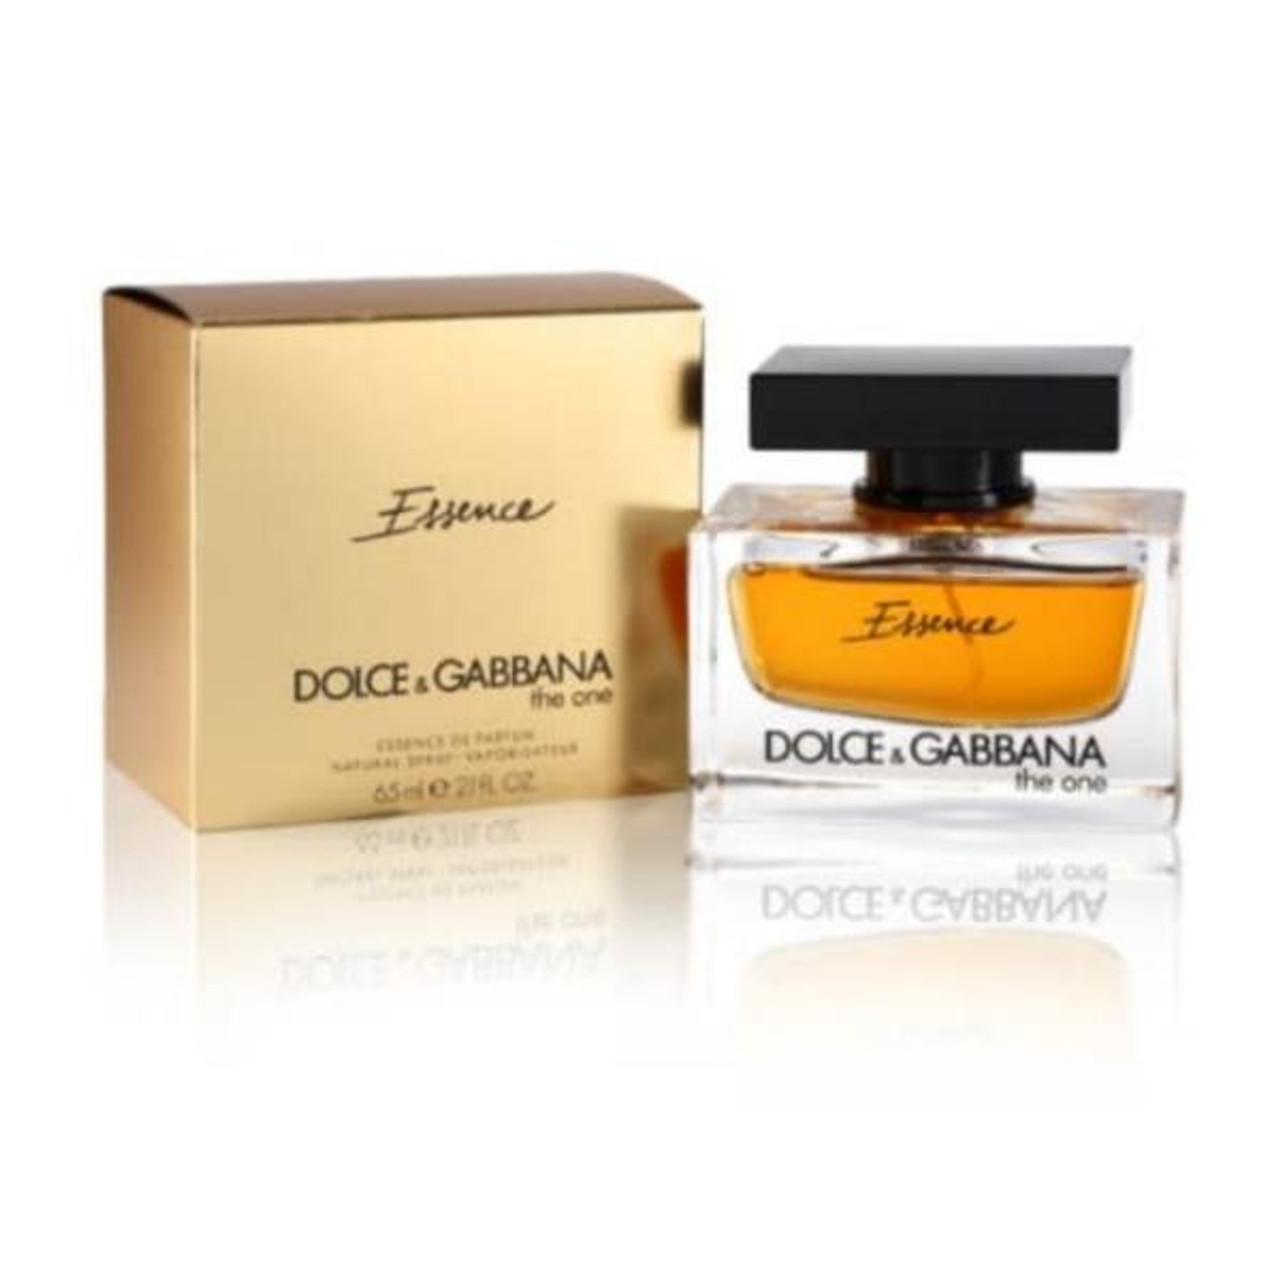 dolce the one essence